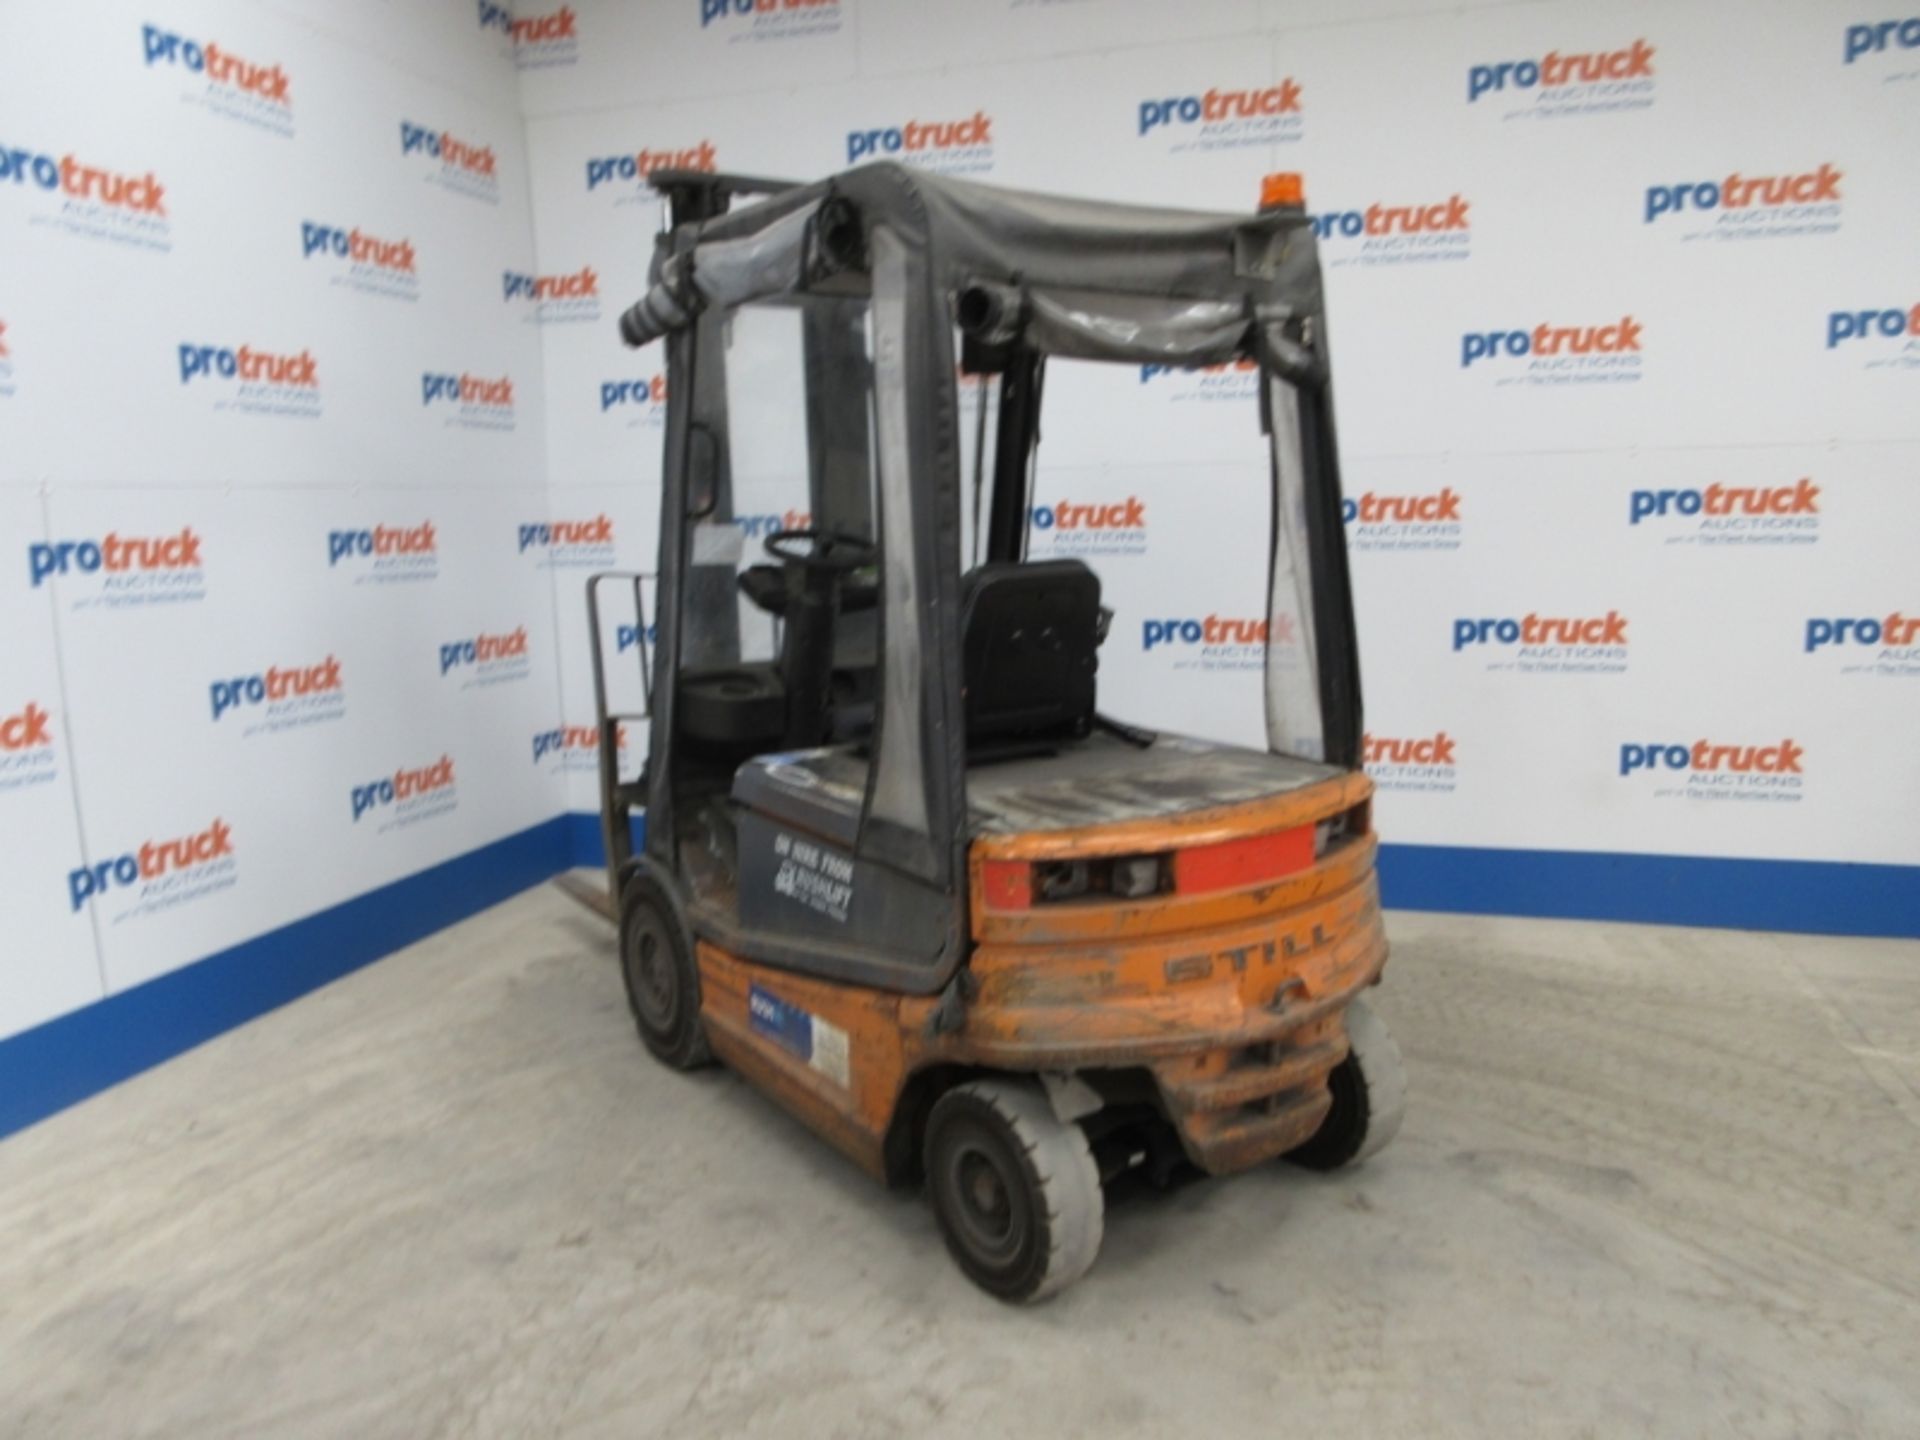 STILL R60-20 Plant Electric - VIN: 516022003597 - Year: 1997 - 12,829 Hours - Duplex Forklift, - Image 4 of 9